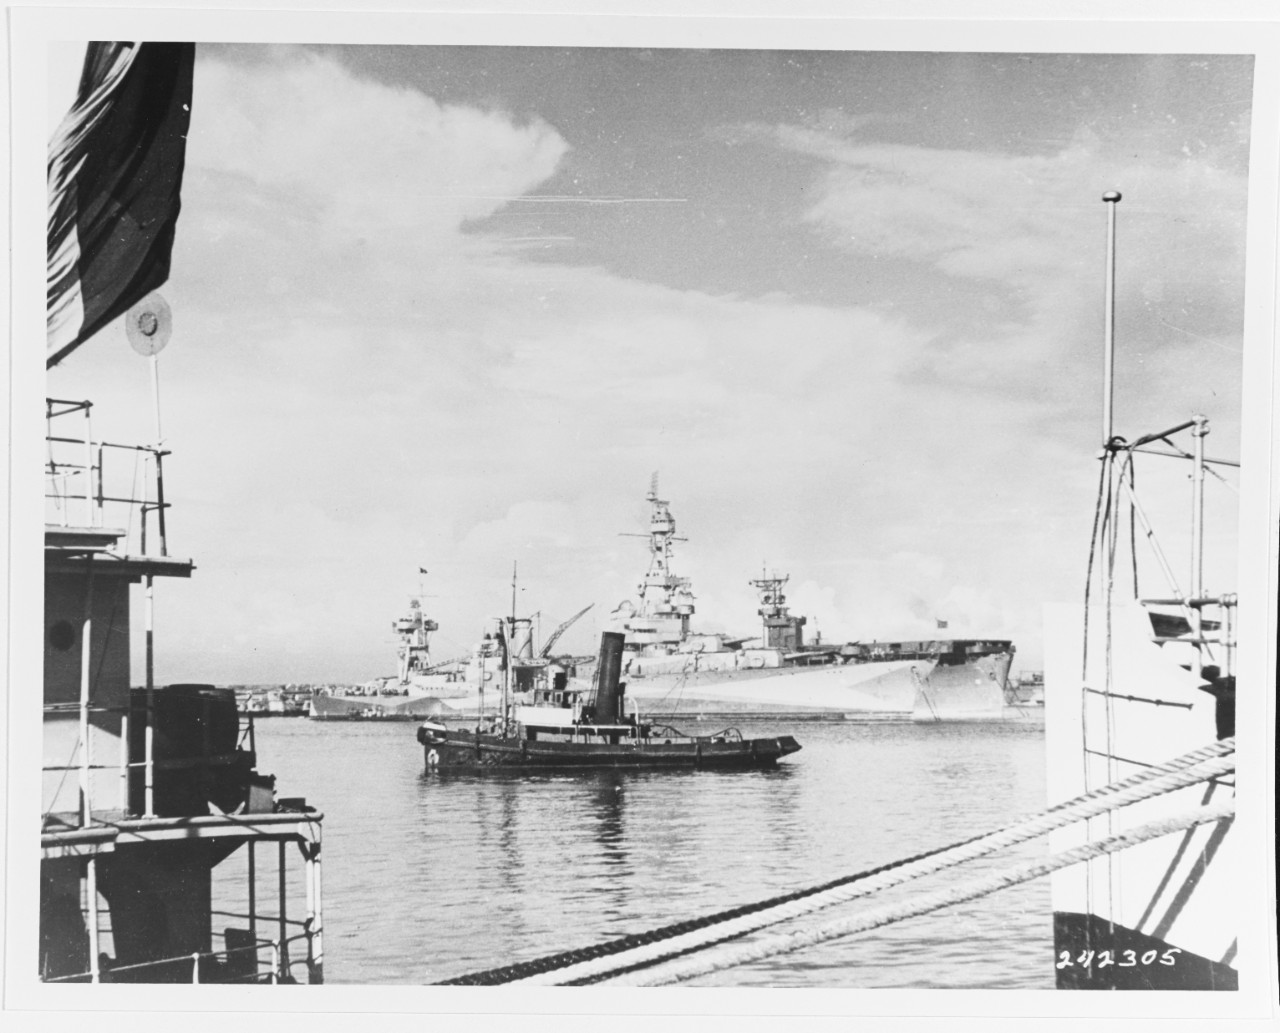 USS AUGUSTA (CA-31) in Casablanca Harbor, Morocco, November 12, 1942. A French tug is in the foreground